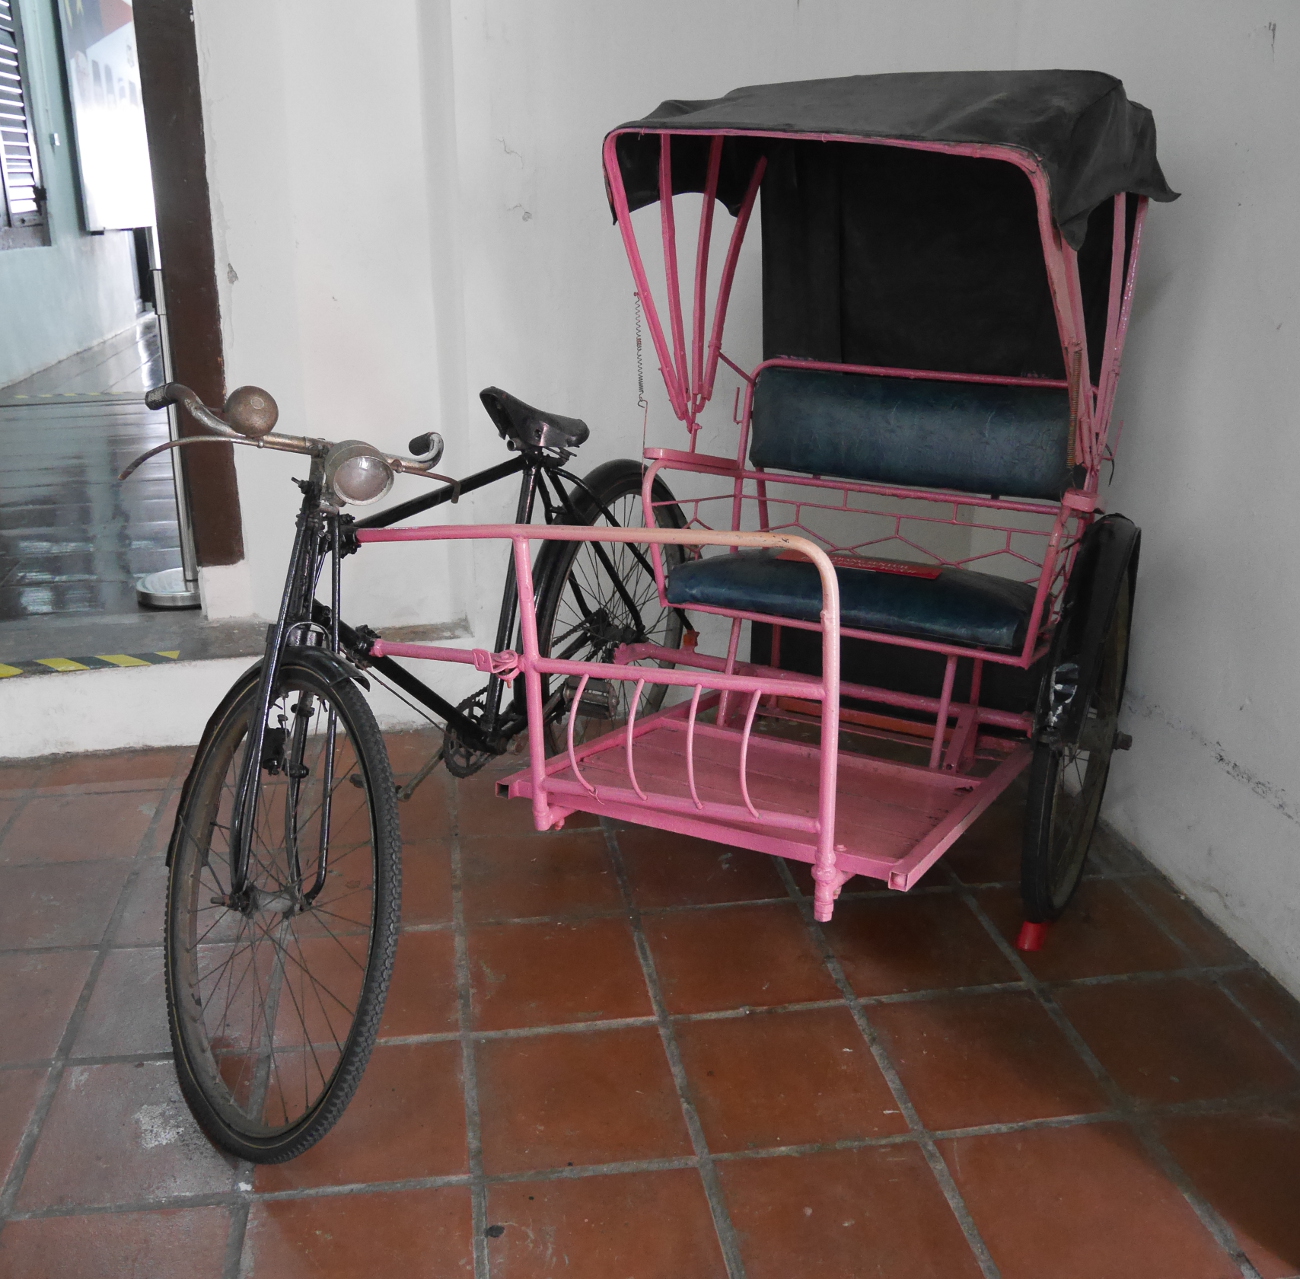 Trishaw in the History and Ethnography Museum, Malacca.